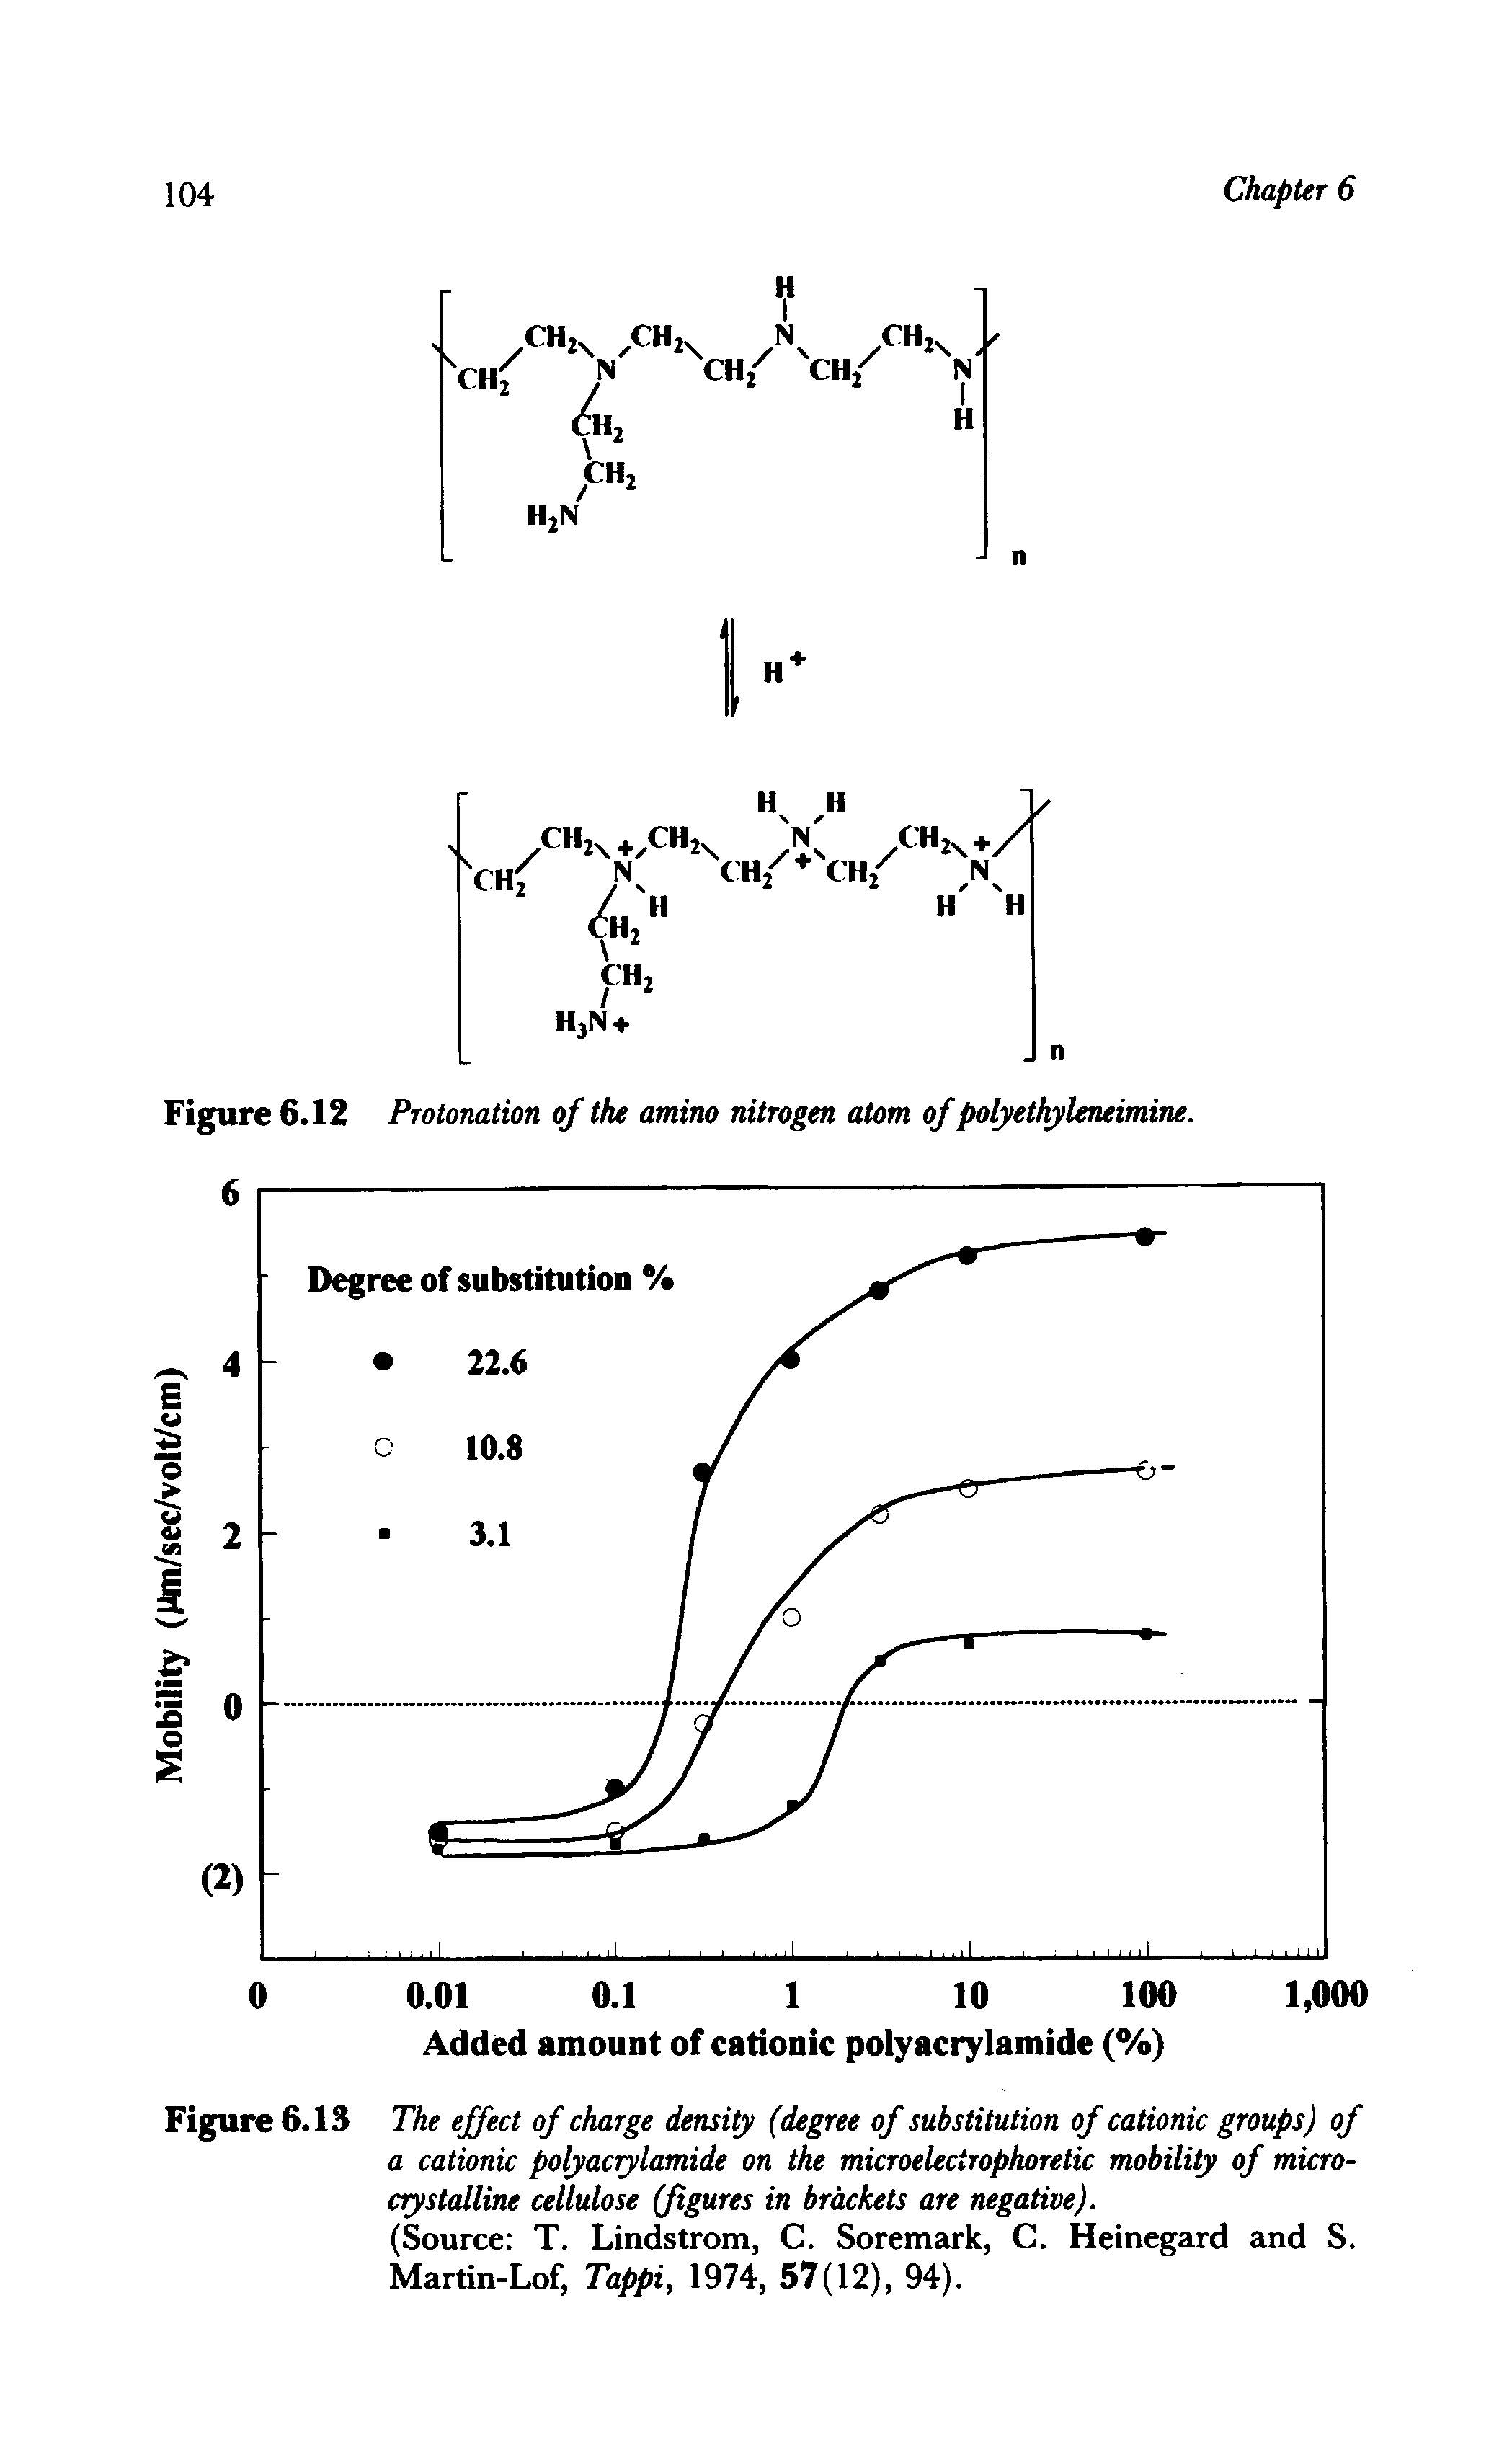 Figure 6.13 The effect of charge density (degree of substitution of cationic groups) of a cationic polyacrylamide on the microelecirophoretic mobility of microcrystalline cellulose (figures in brackets are negative).